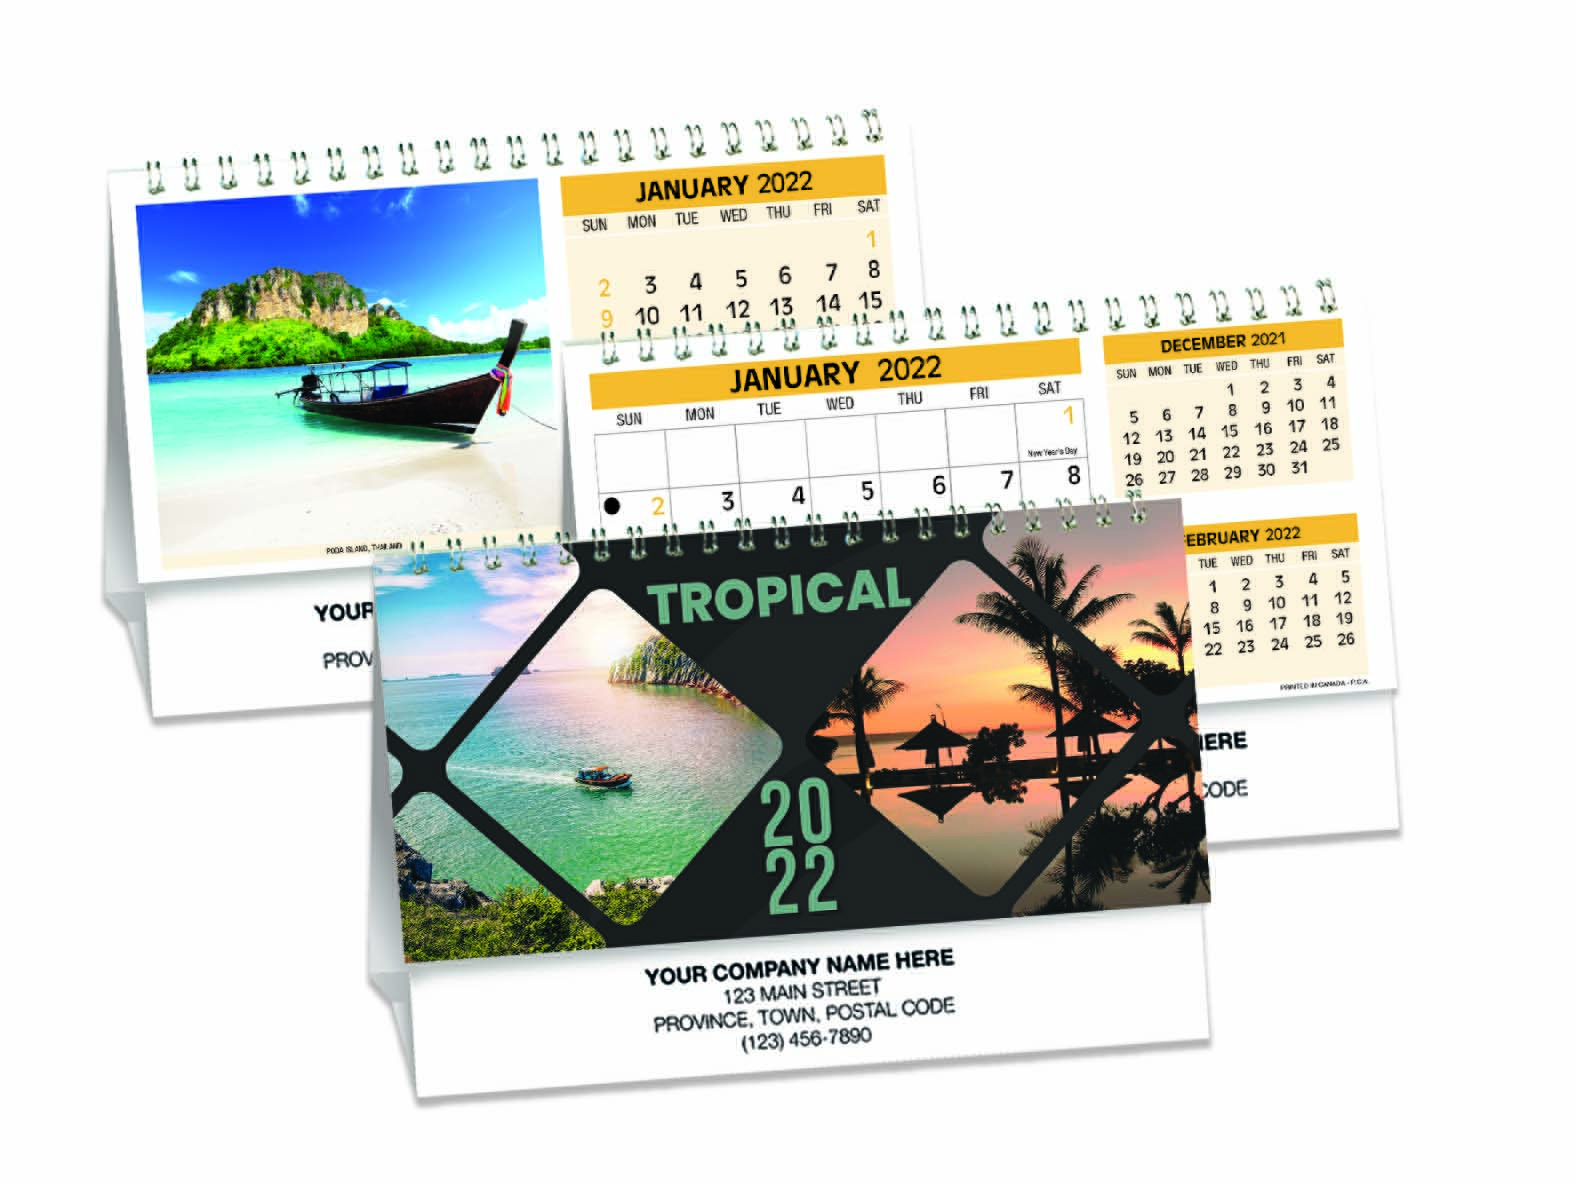 This desk calendar offers scenes of Canadian beauty and can be personalized with your business information in 2 languages.